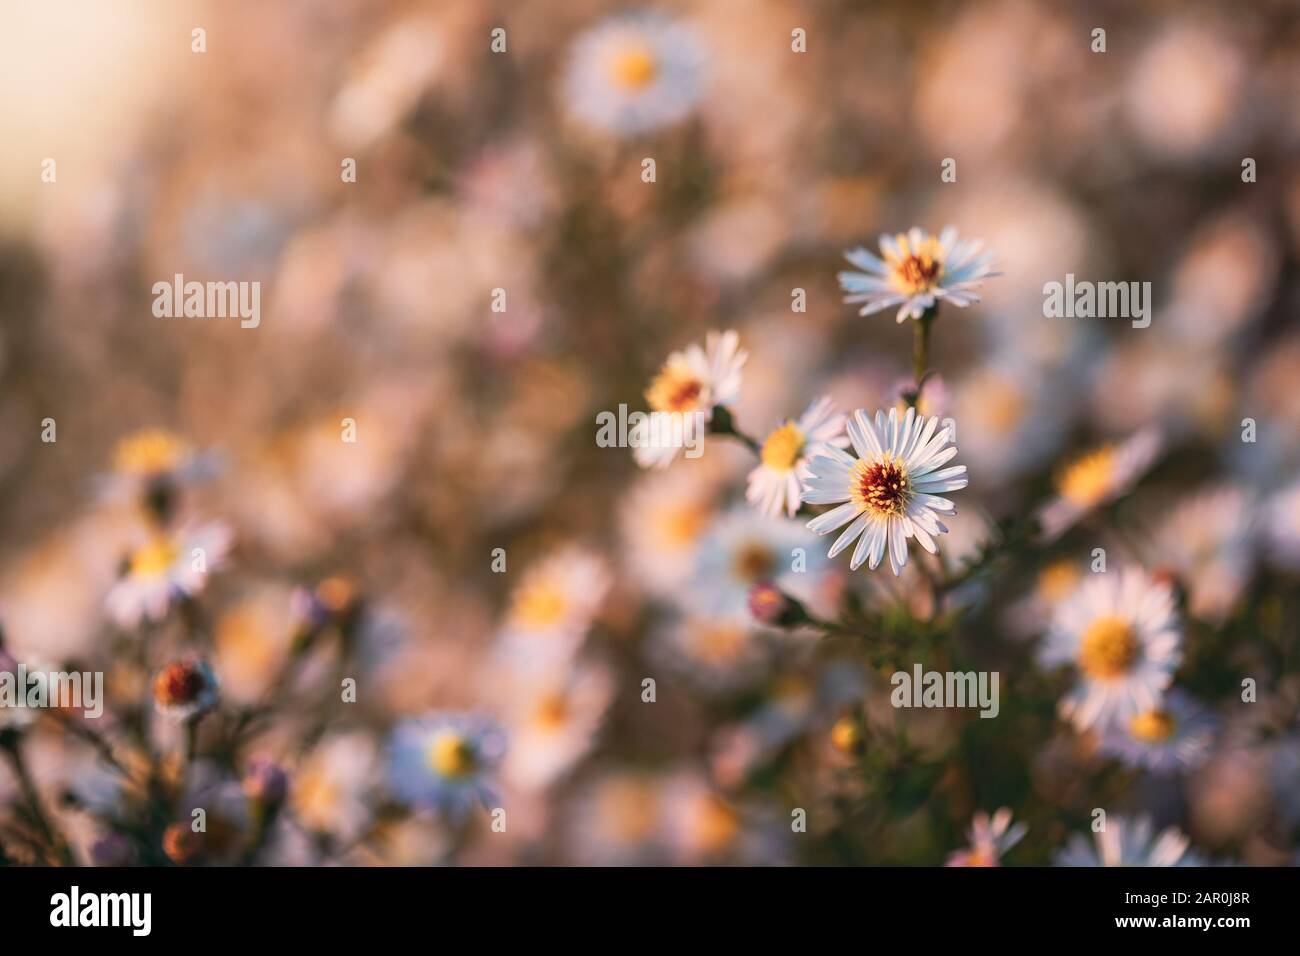 Blooming Aster Perennial Flowering Plants In The Family Asteraceae. Bush In Autumn Season. Stock Photo